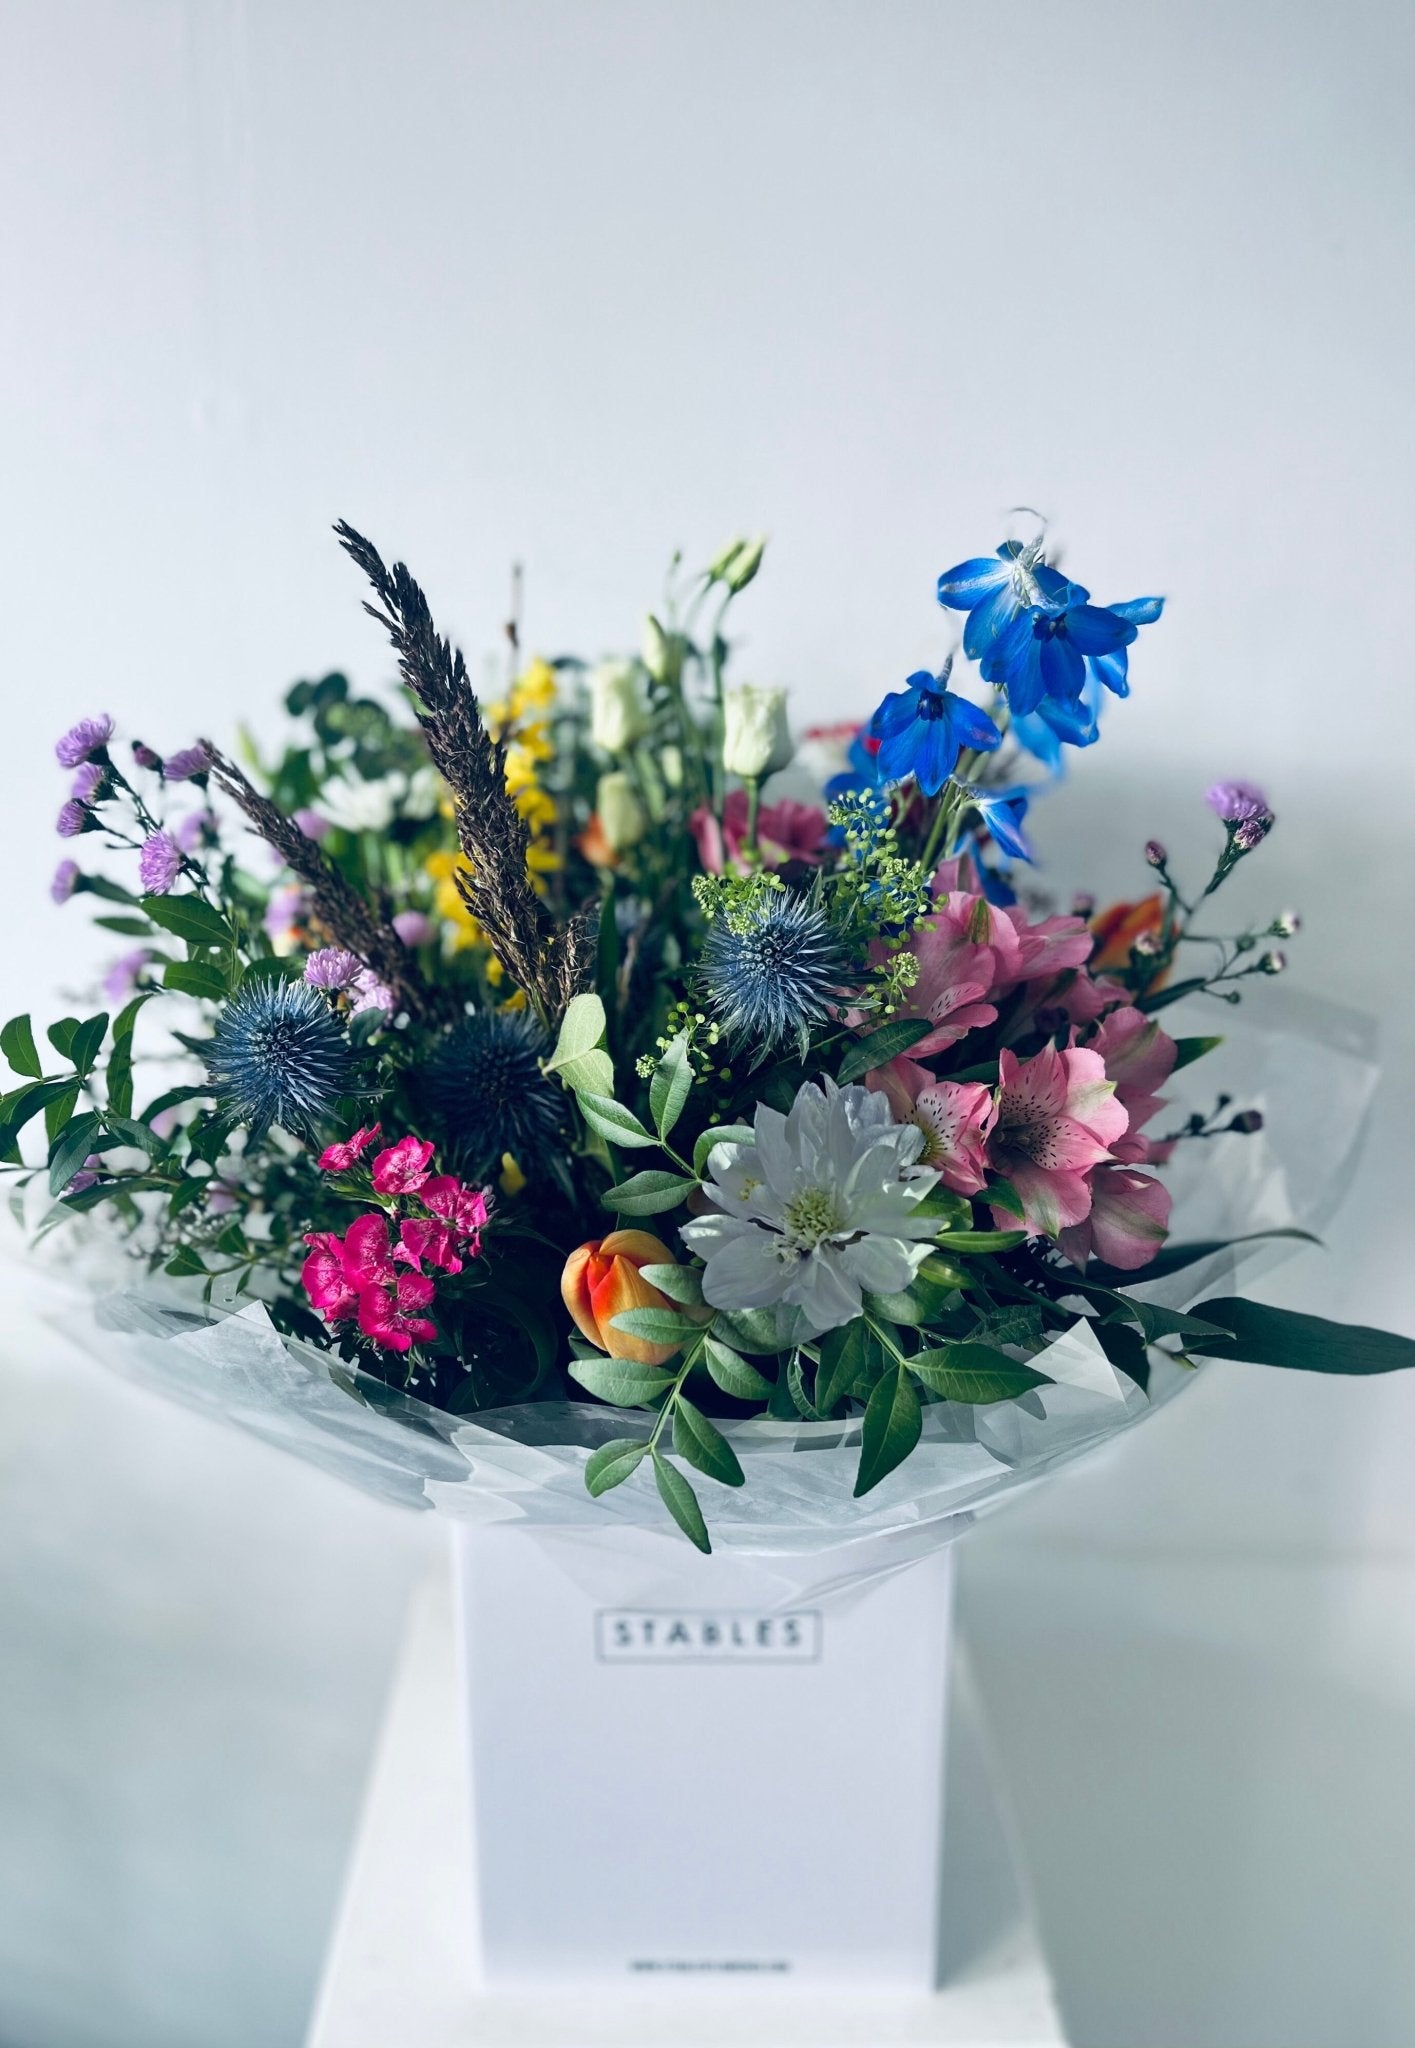 Stables Meadow Bouquet - Stables Flower Co